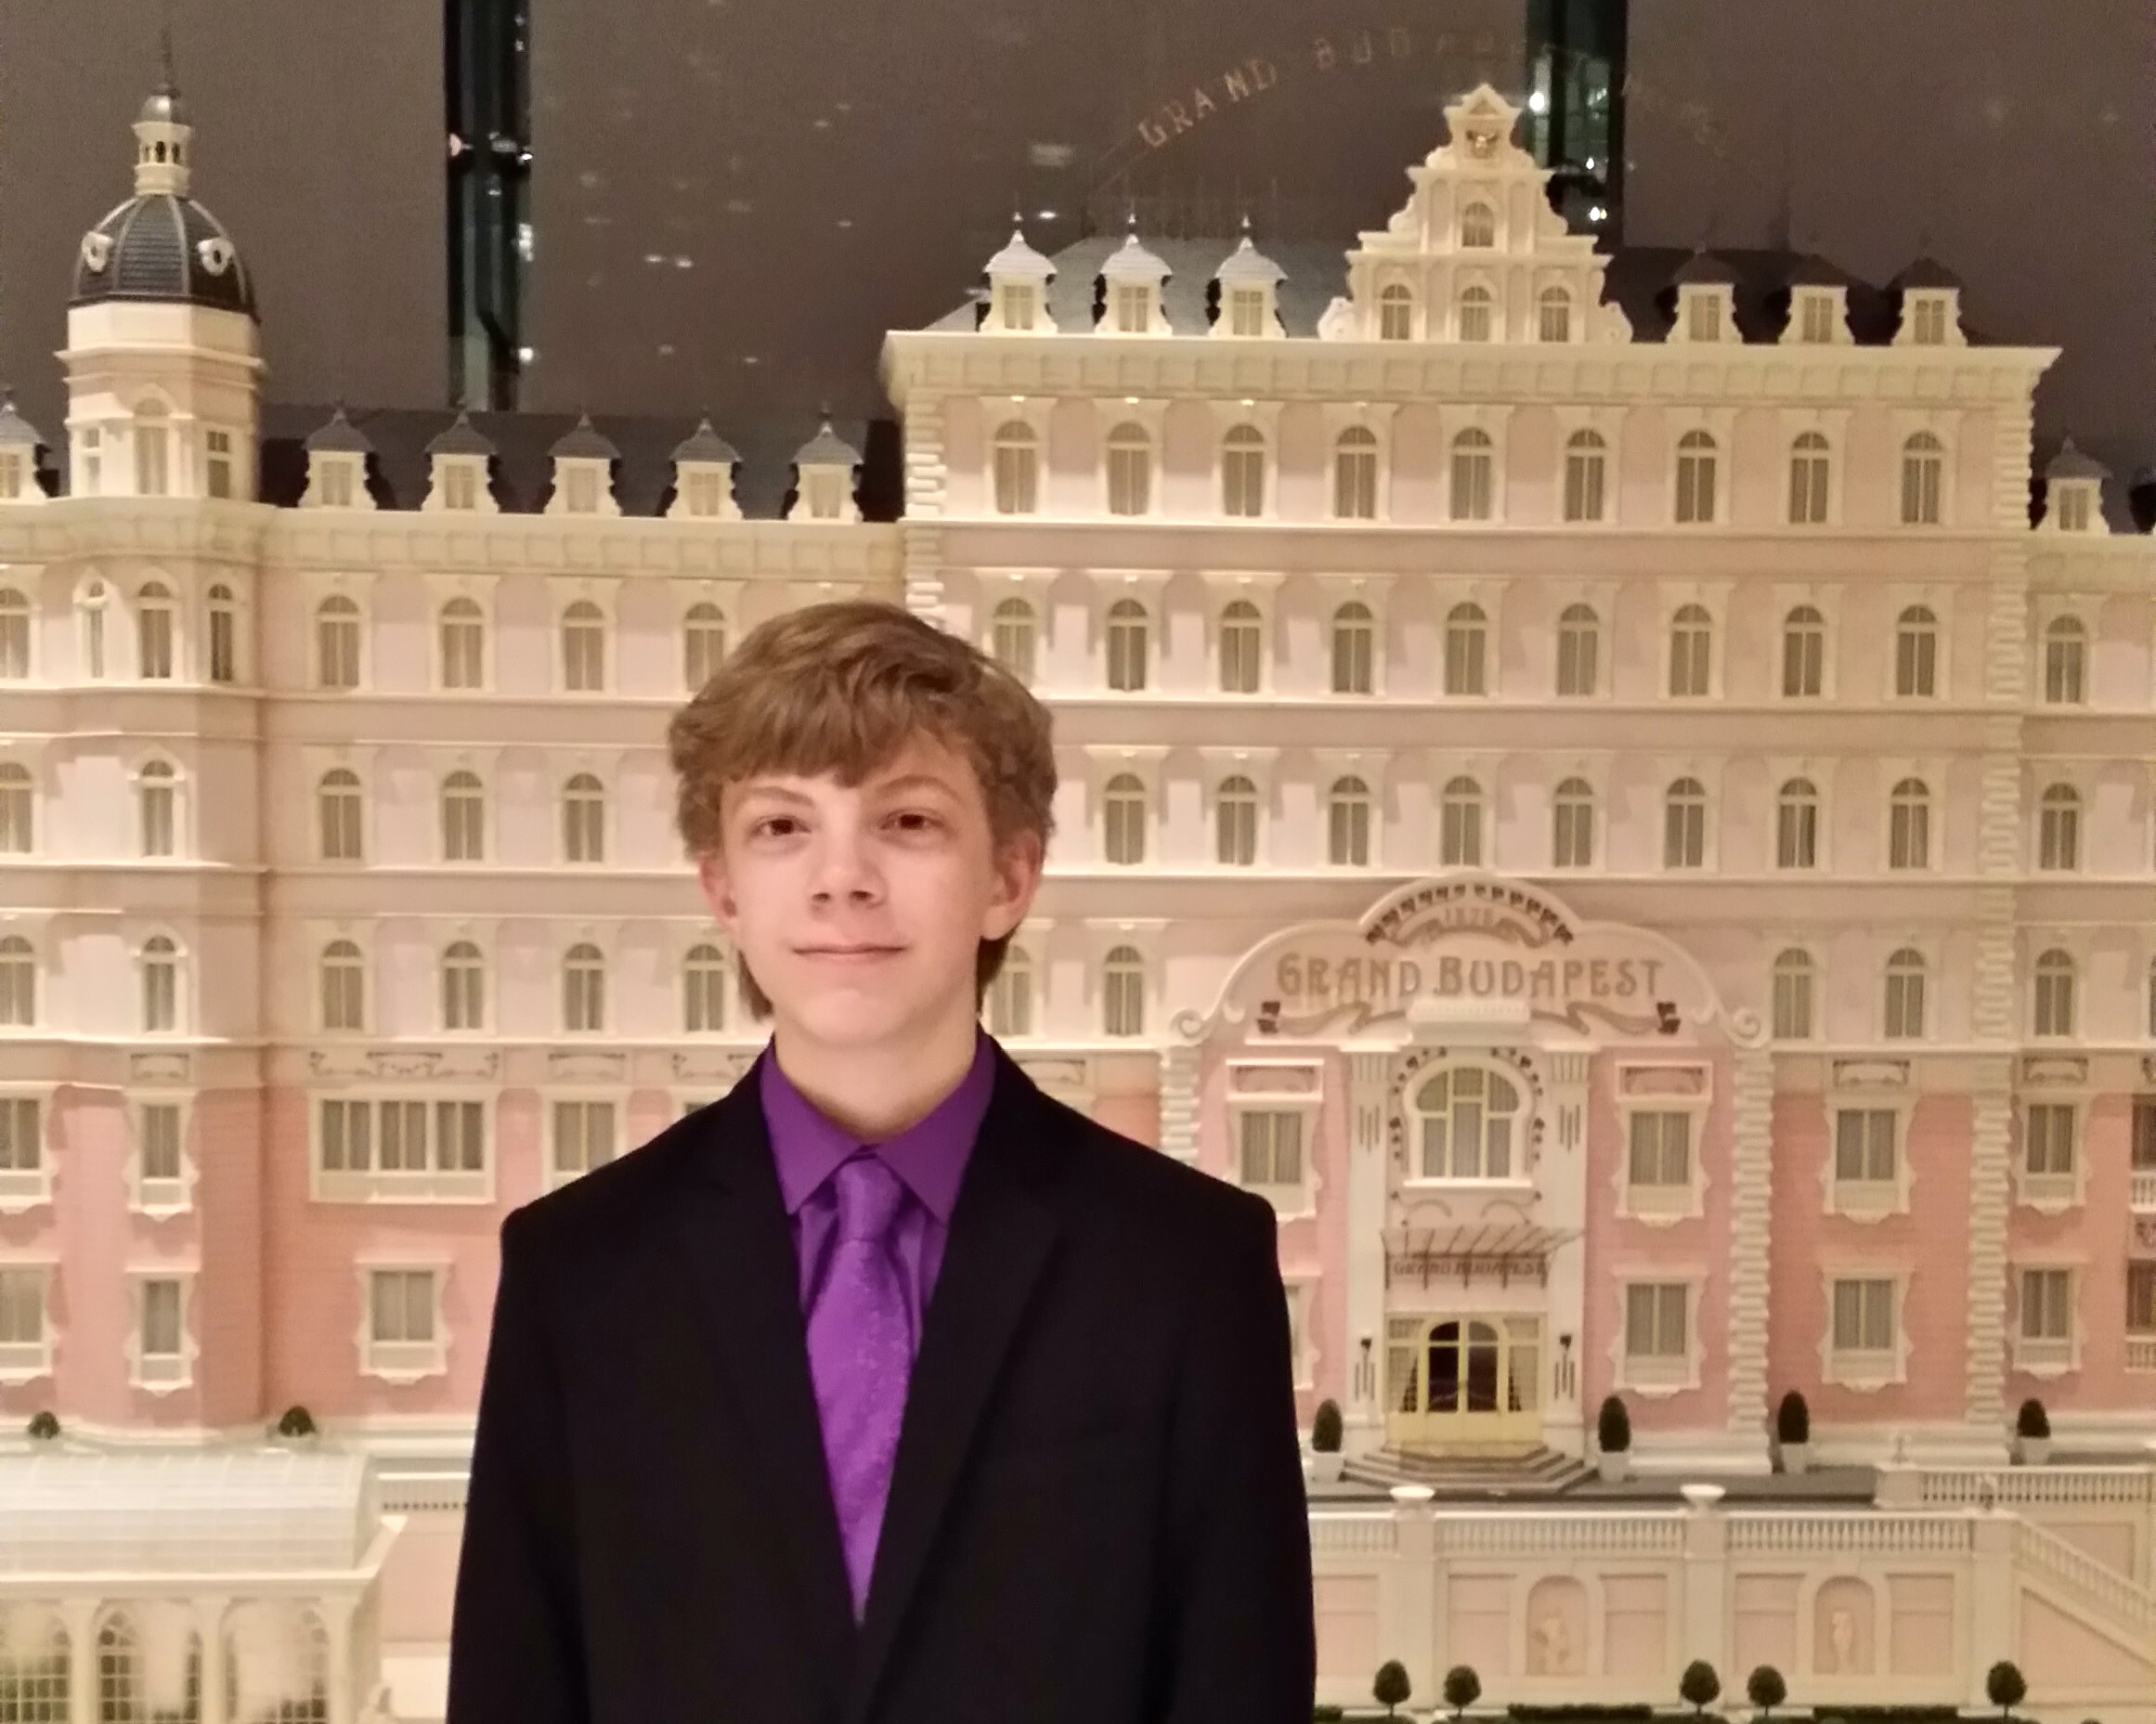 Gabriel at Opening Night for Grand Budapest Hotel at Lincoln Center